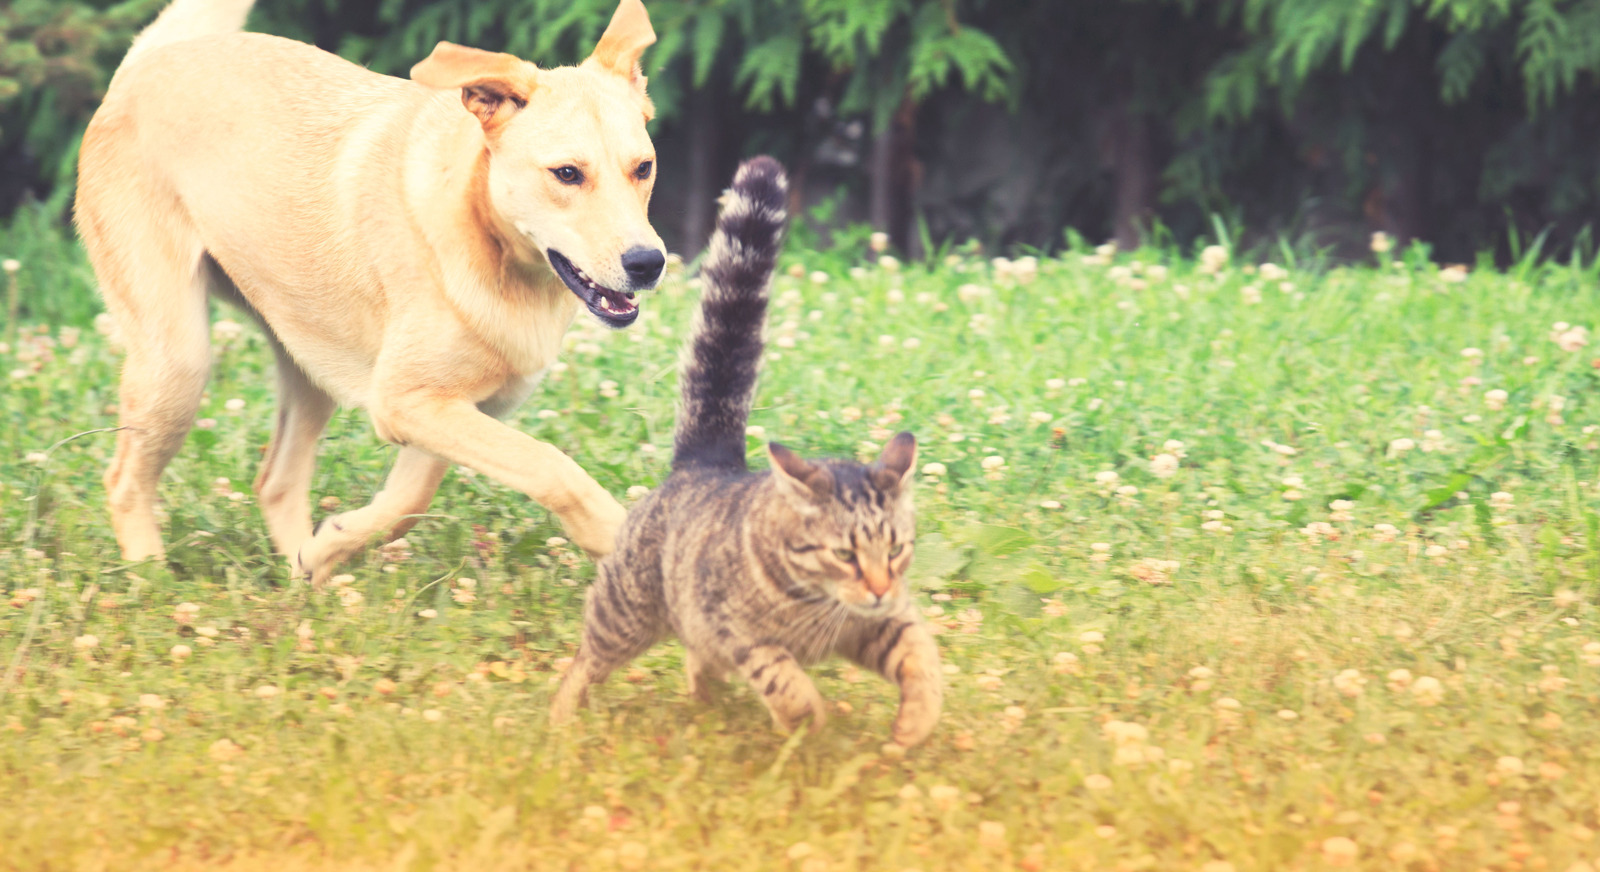 A dog and cat running in a garden together